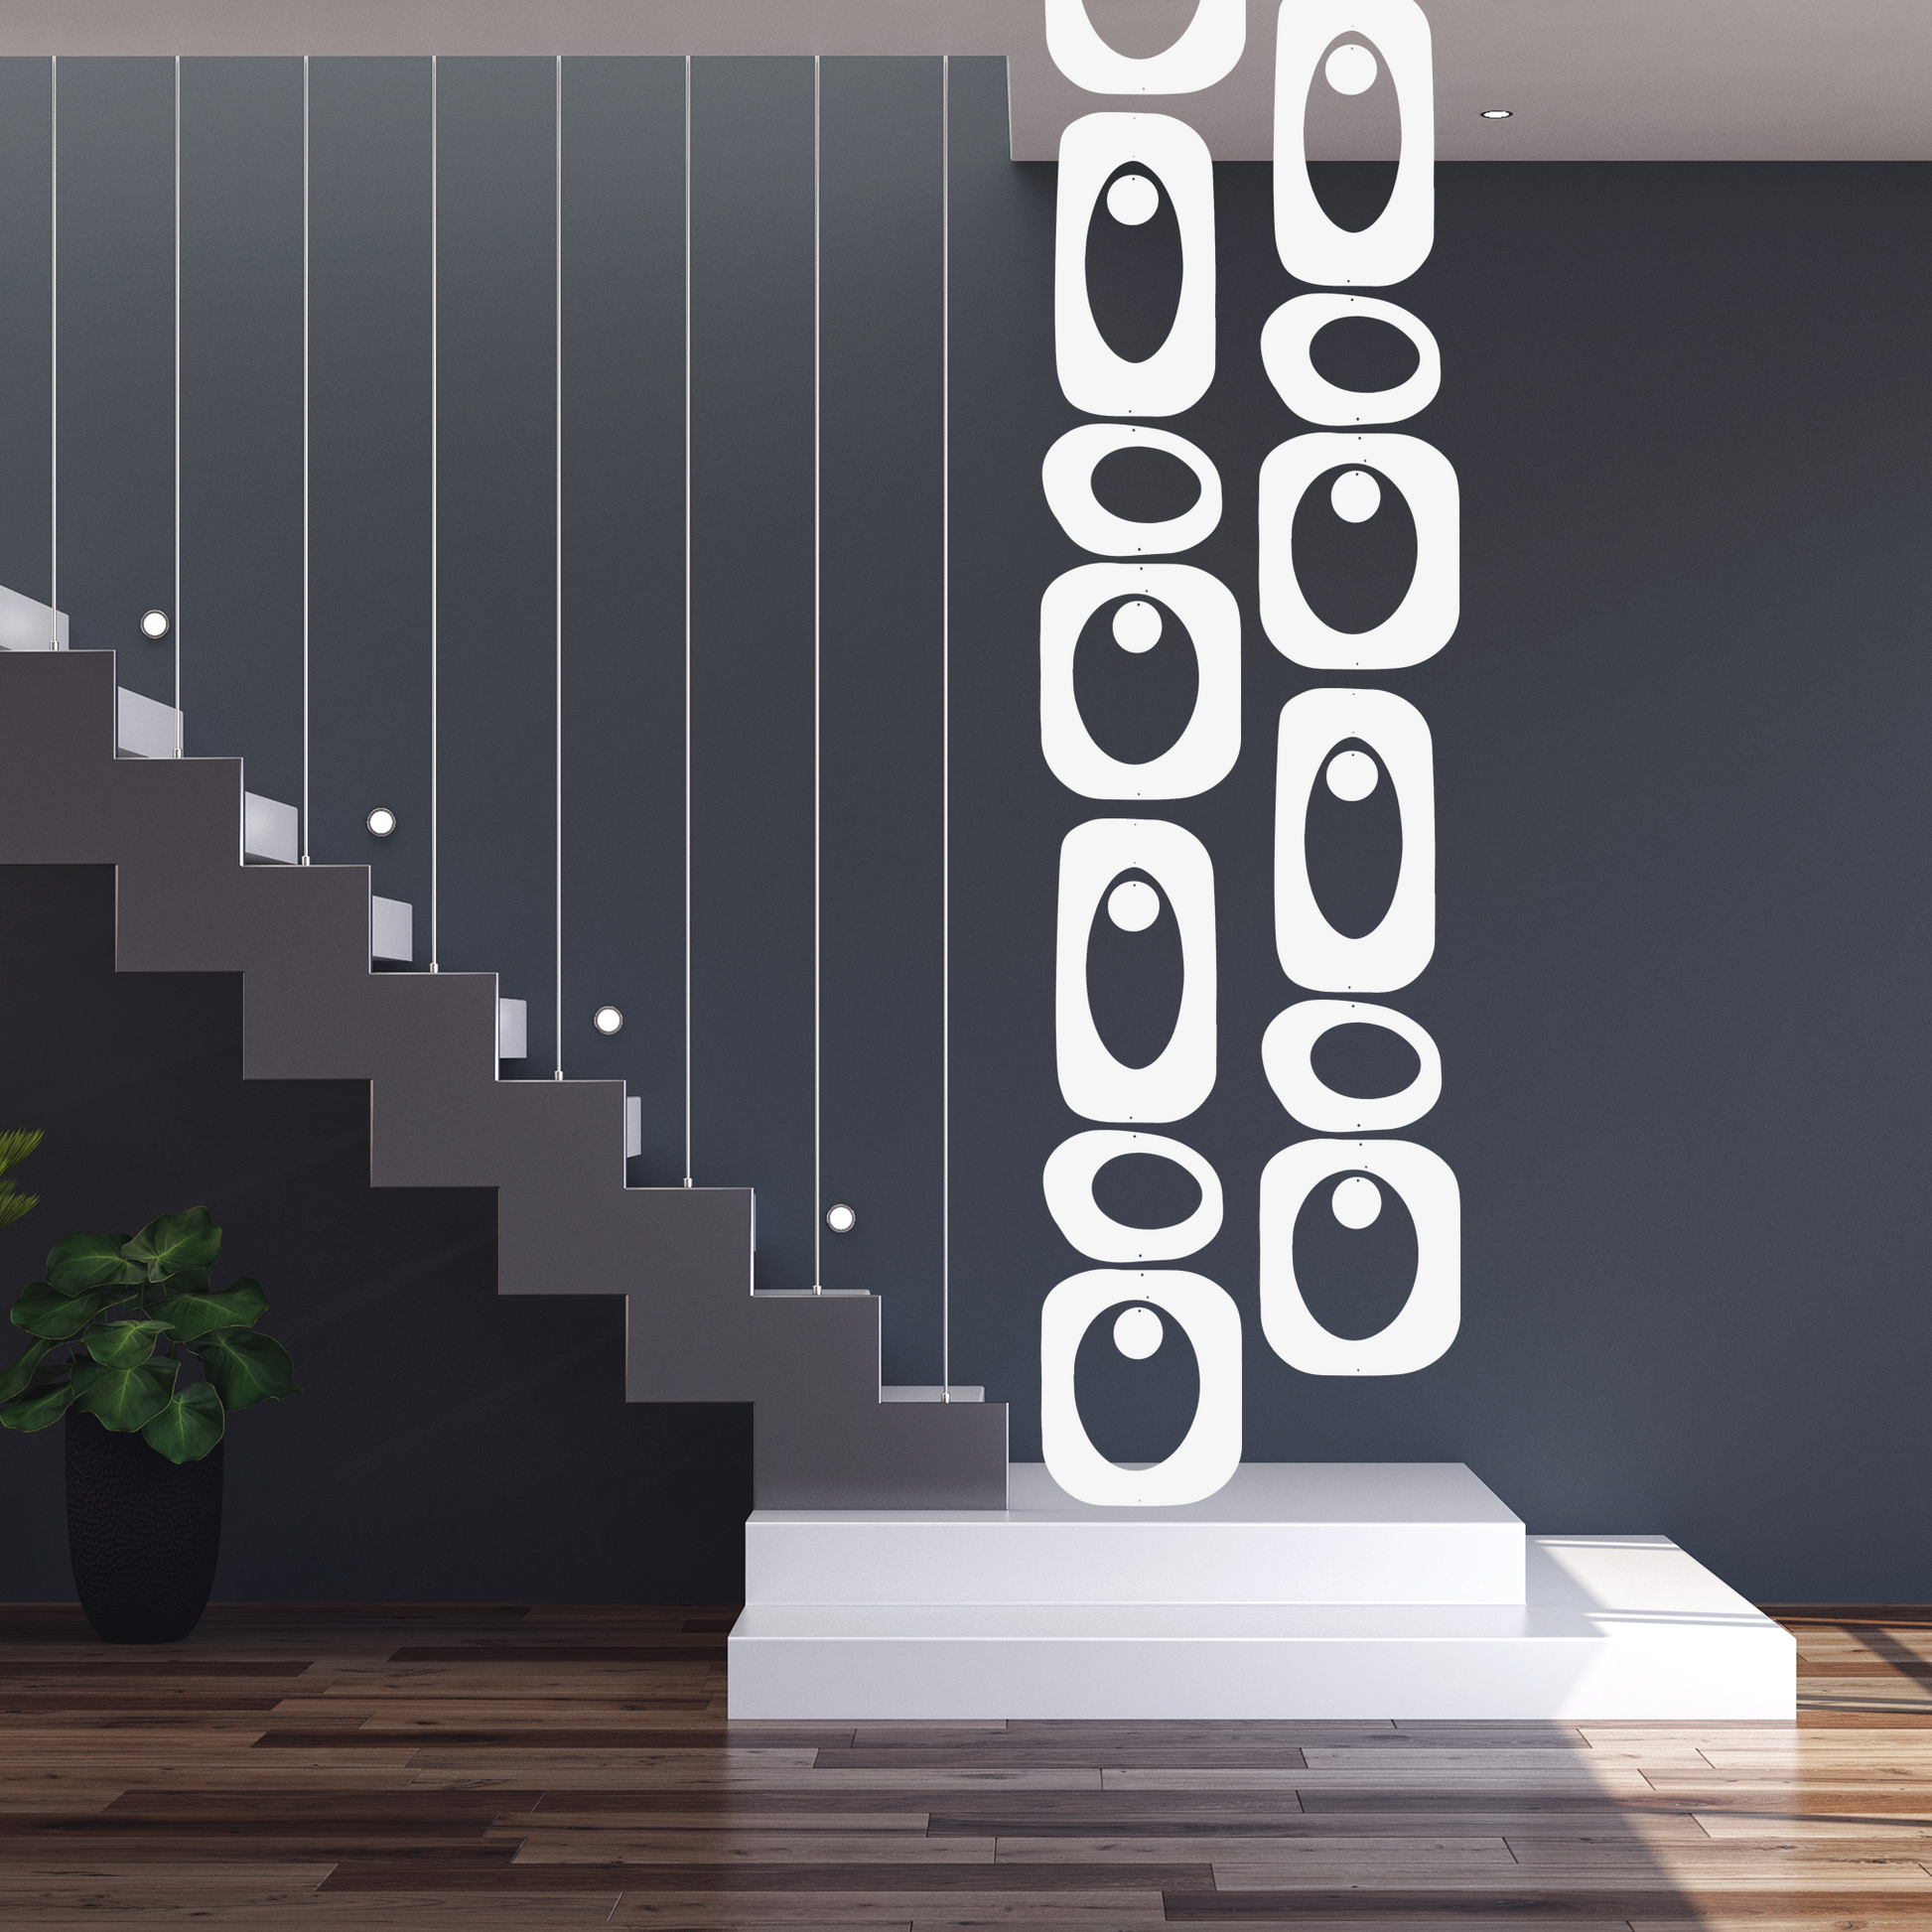 Beautiful modern minimalist staircase with 2 strands of white Beatnik Party Hanging Art Mobiles by AtomicMobiles.com